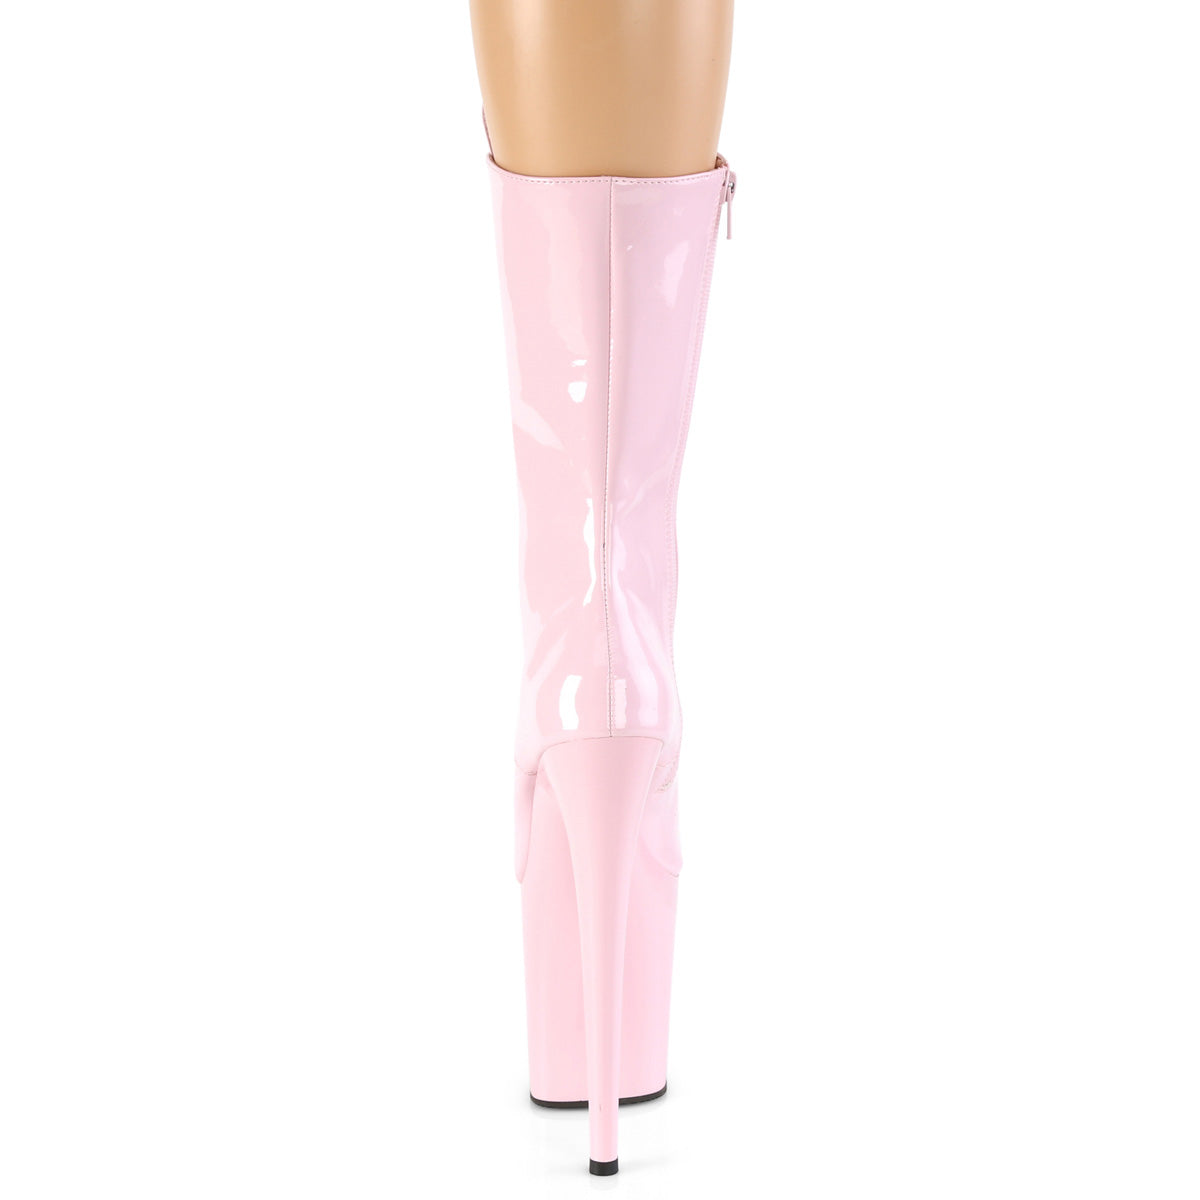 FLAMINGO-1050 Calf High Boots Pink Multi view 3